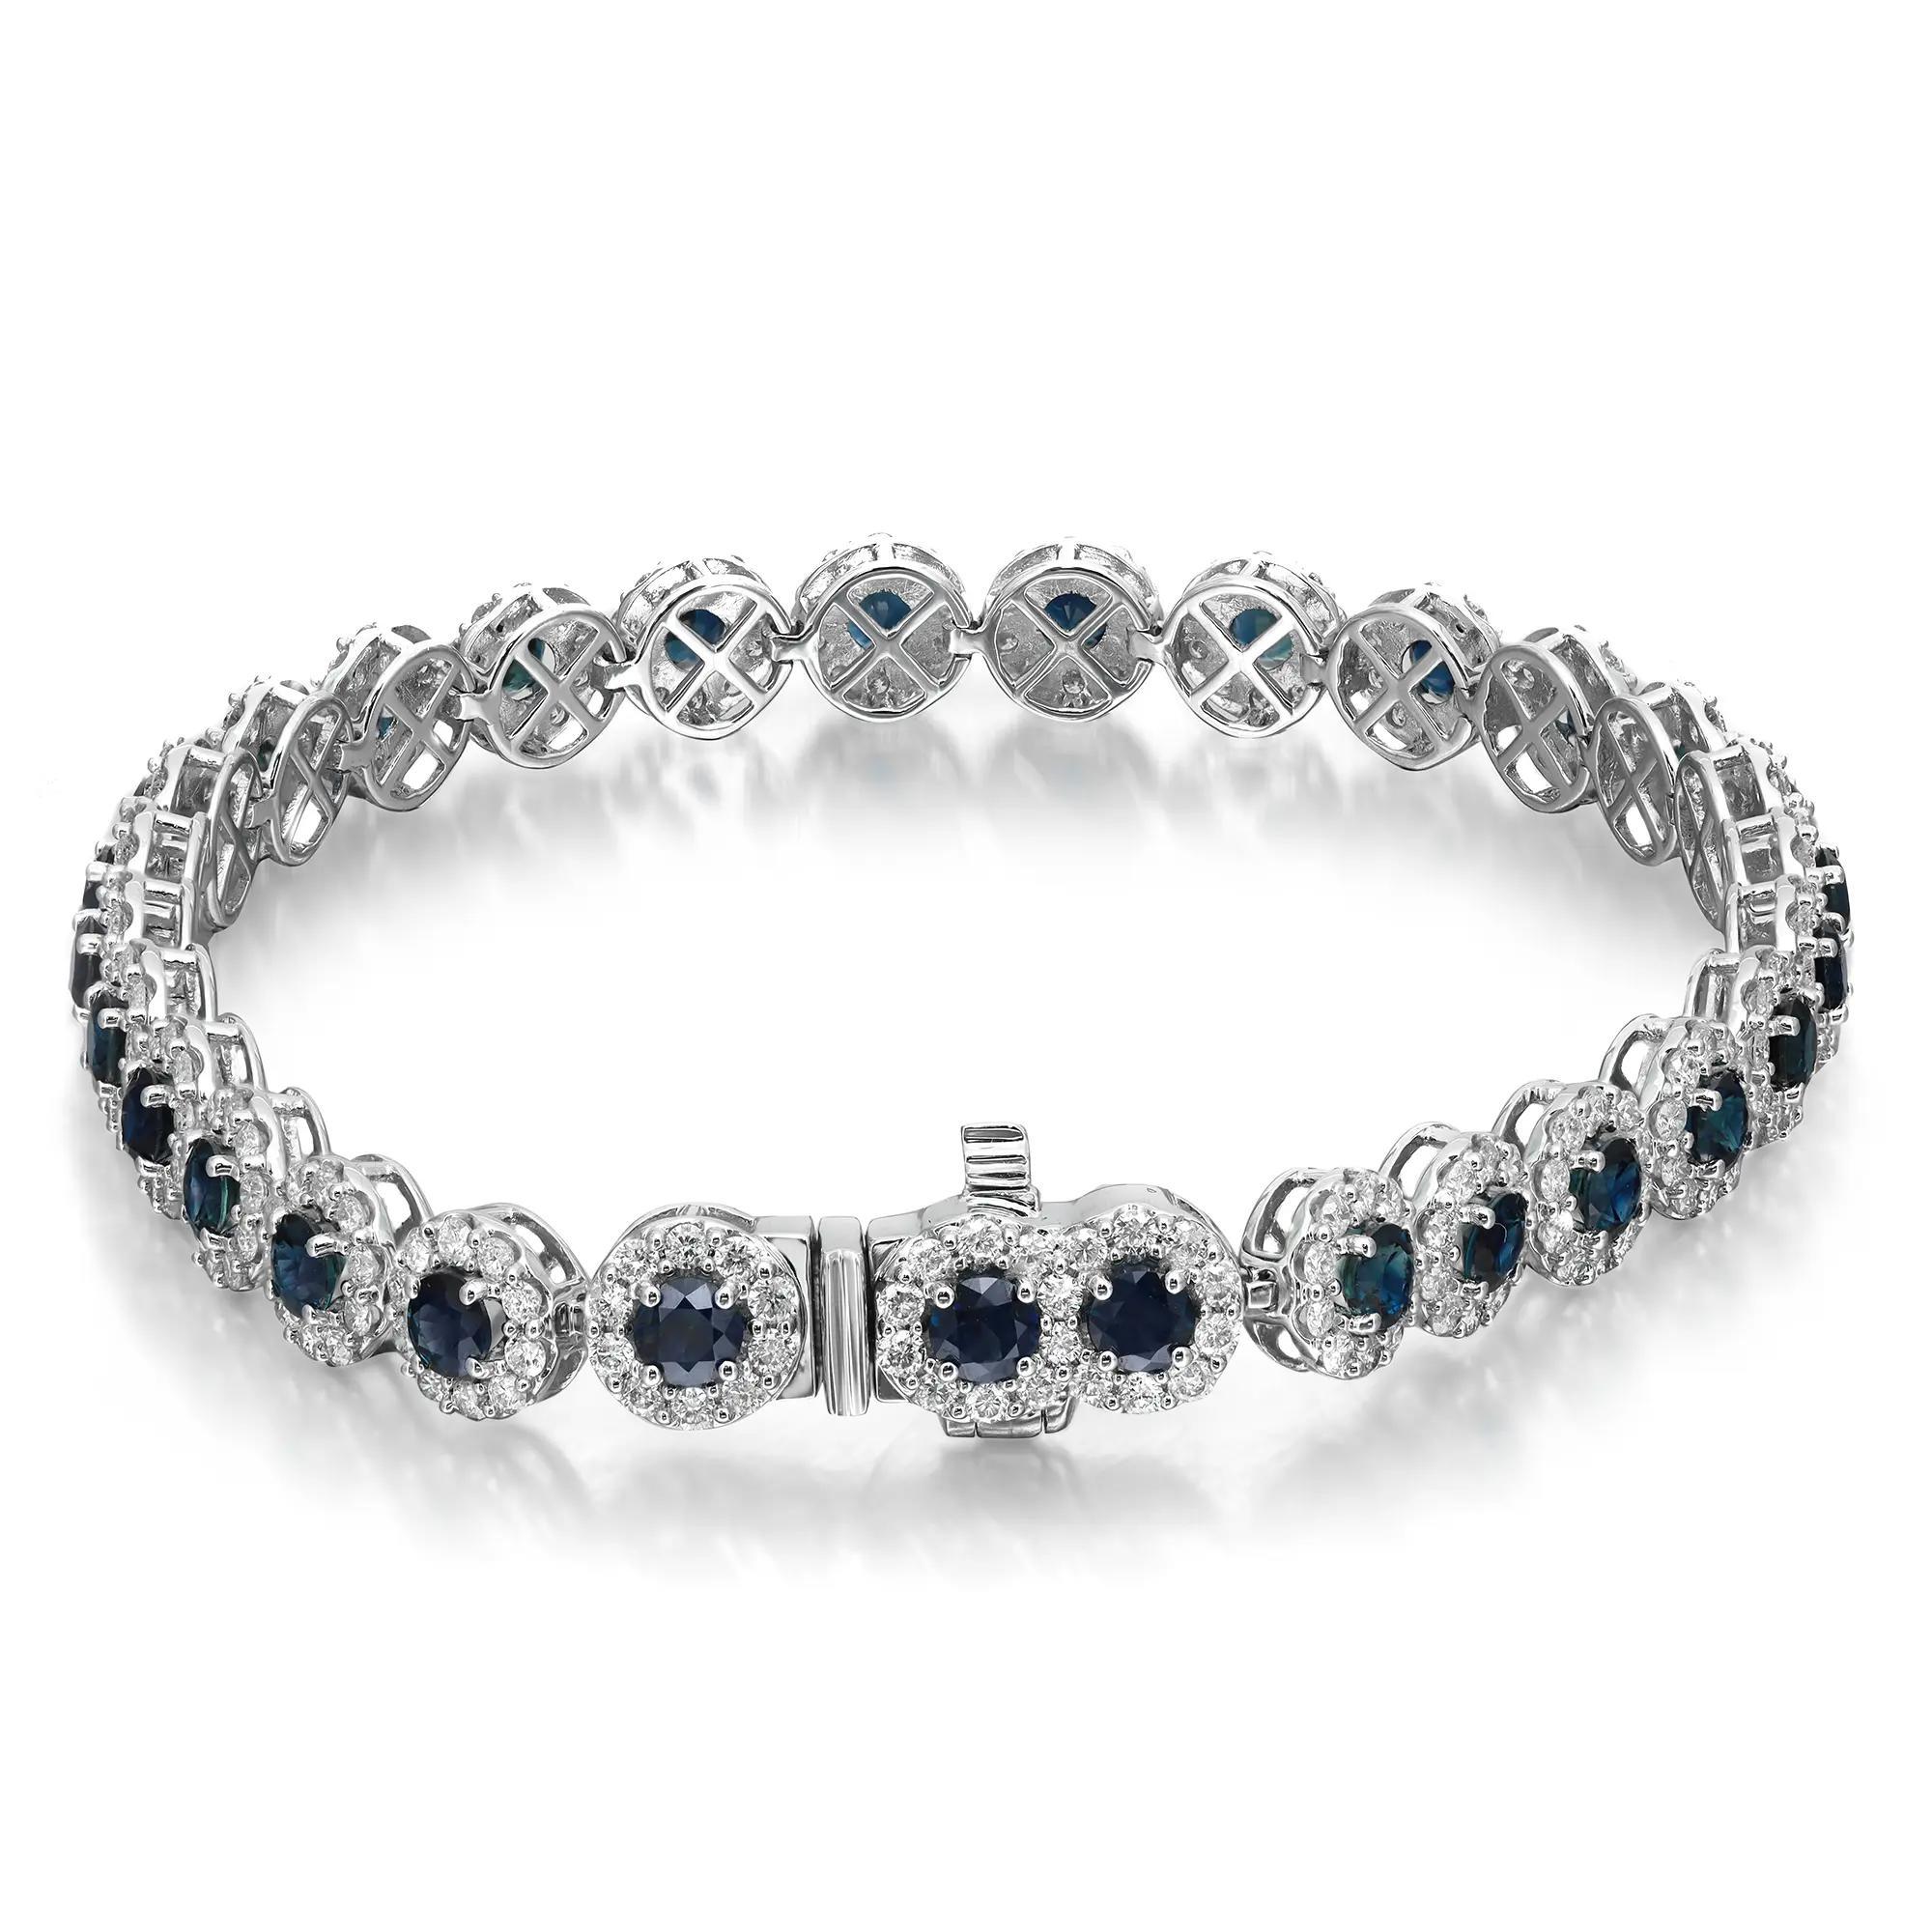 Add a colorful touch of sparkle to your wrist with this gorgeous tennis bracelet from the Rachel Koen collection. Crafted in lustrous 14K white gold. It features 29 prong set round cut blue sapphires highlighted with round brilliant cut diamond